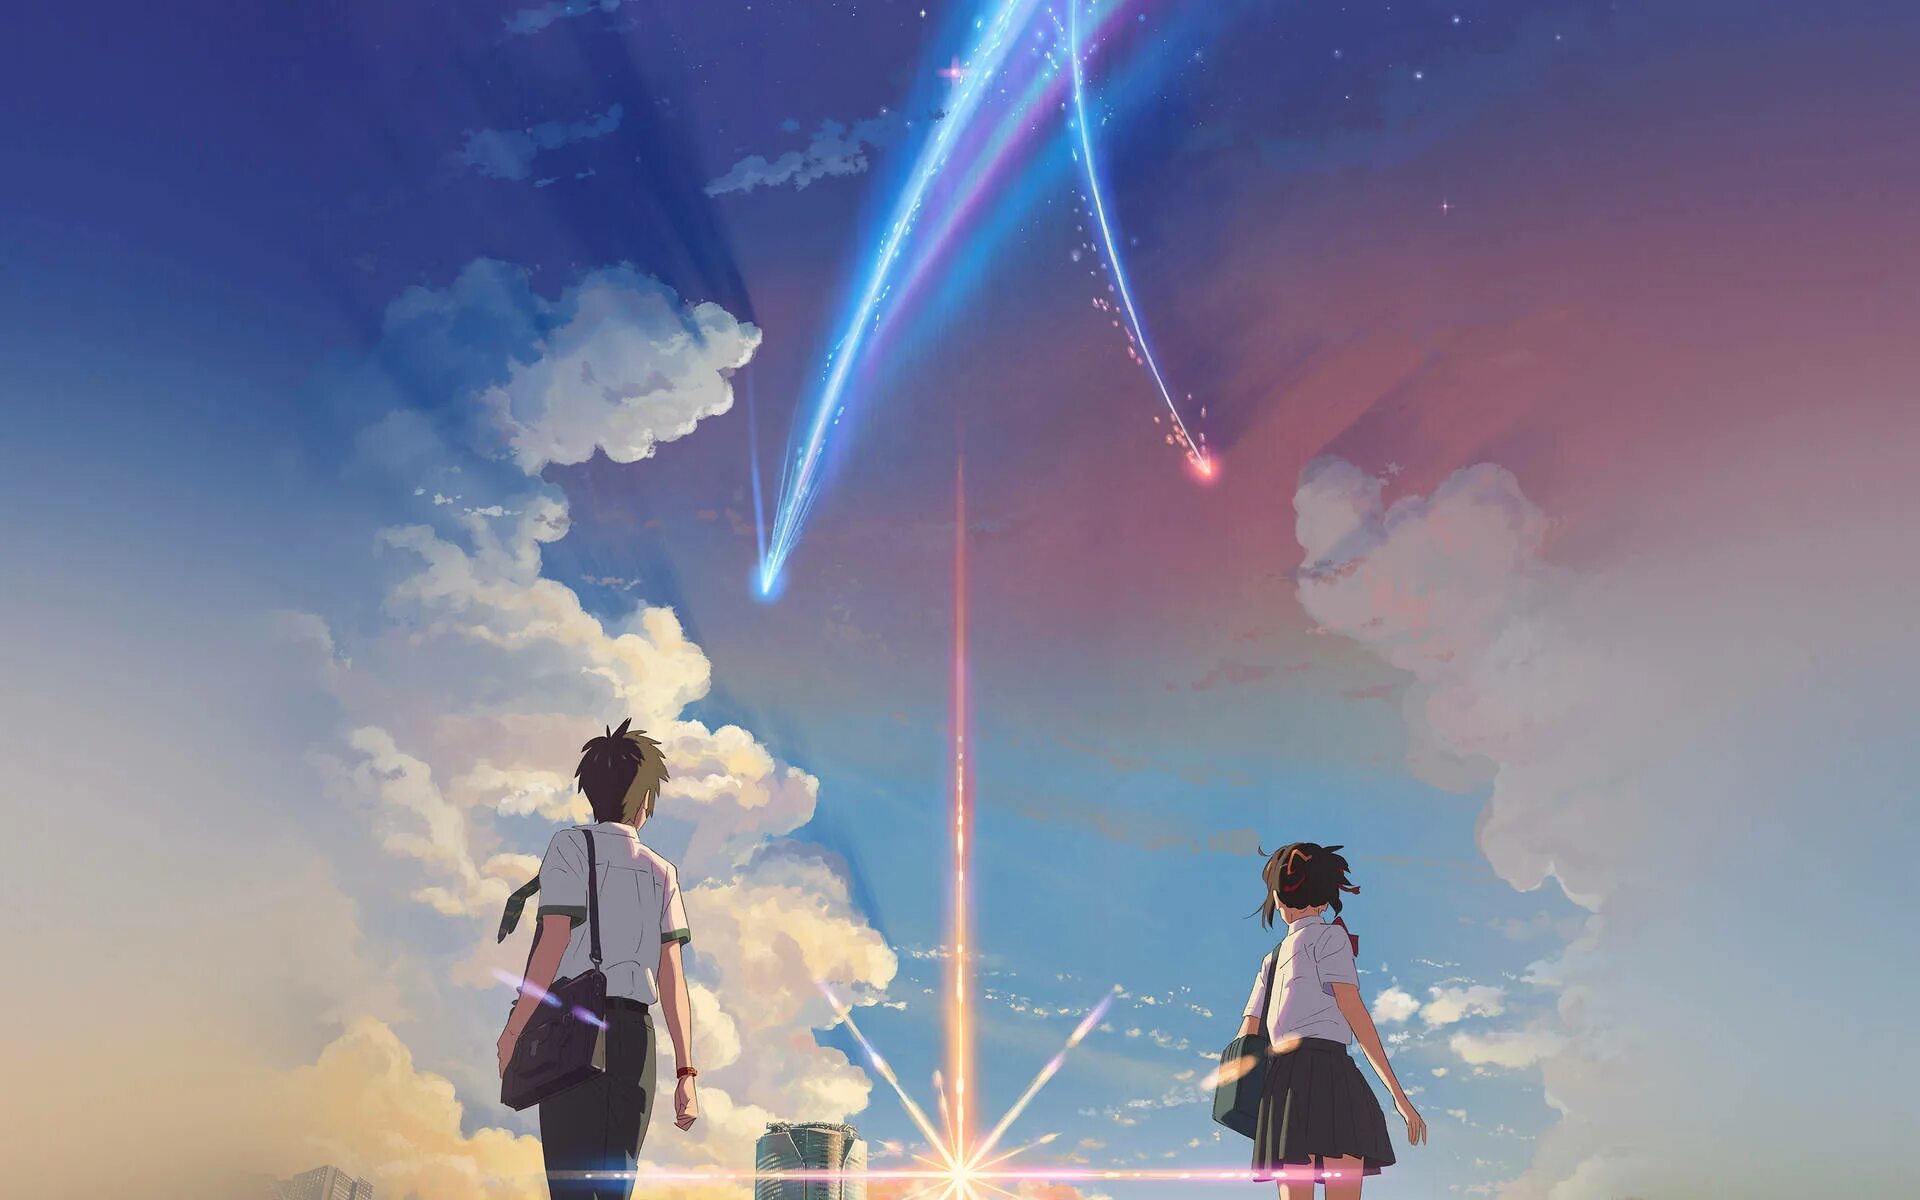 Your name near